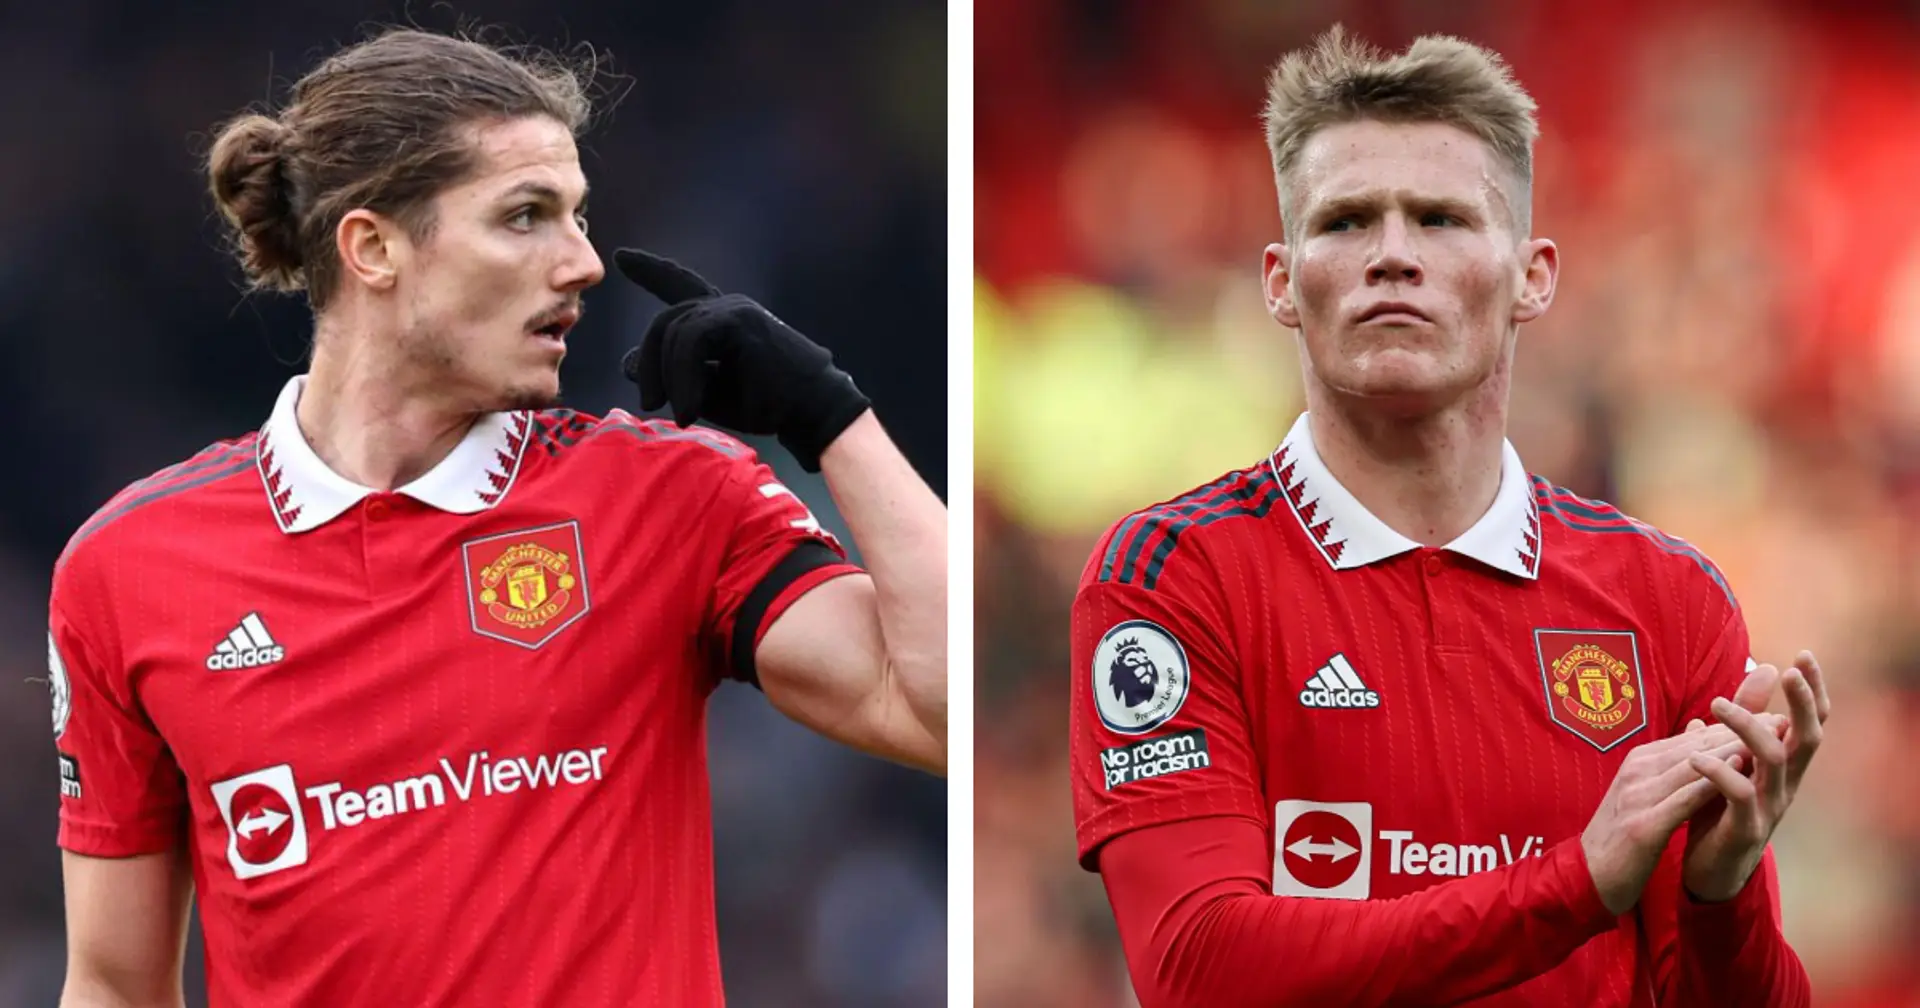 'Keep Sabitzer and let McTominay leave': Man United fans want the Bayern midfielder to stay